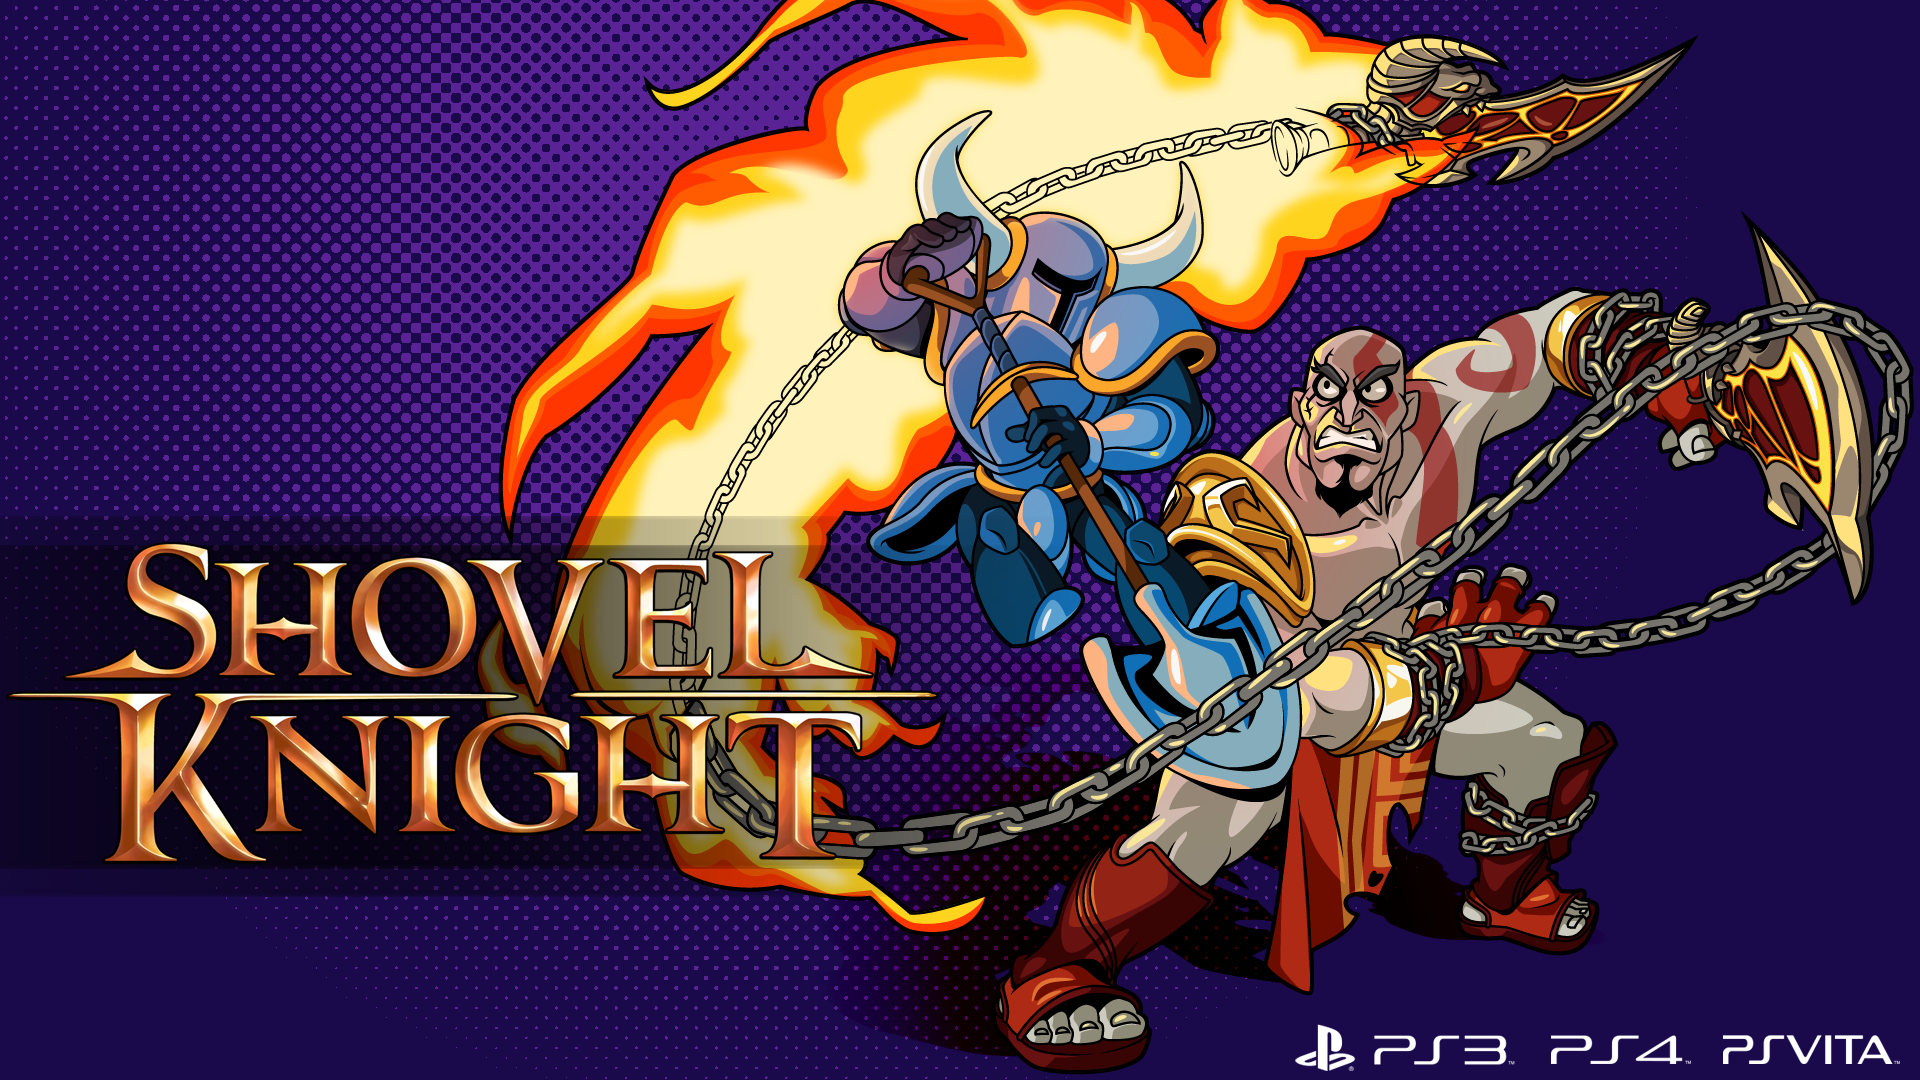 Yacht Club Games Details Kratos Appearance In Shovel Knight On